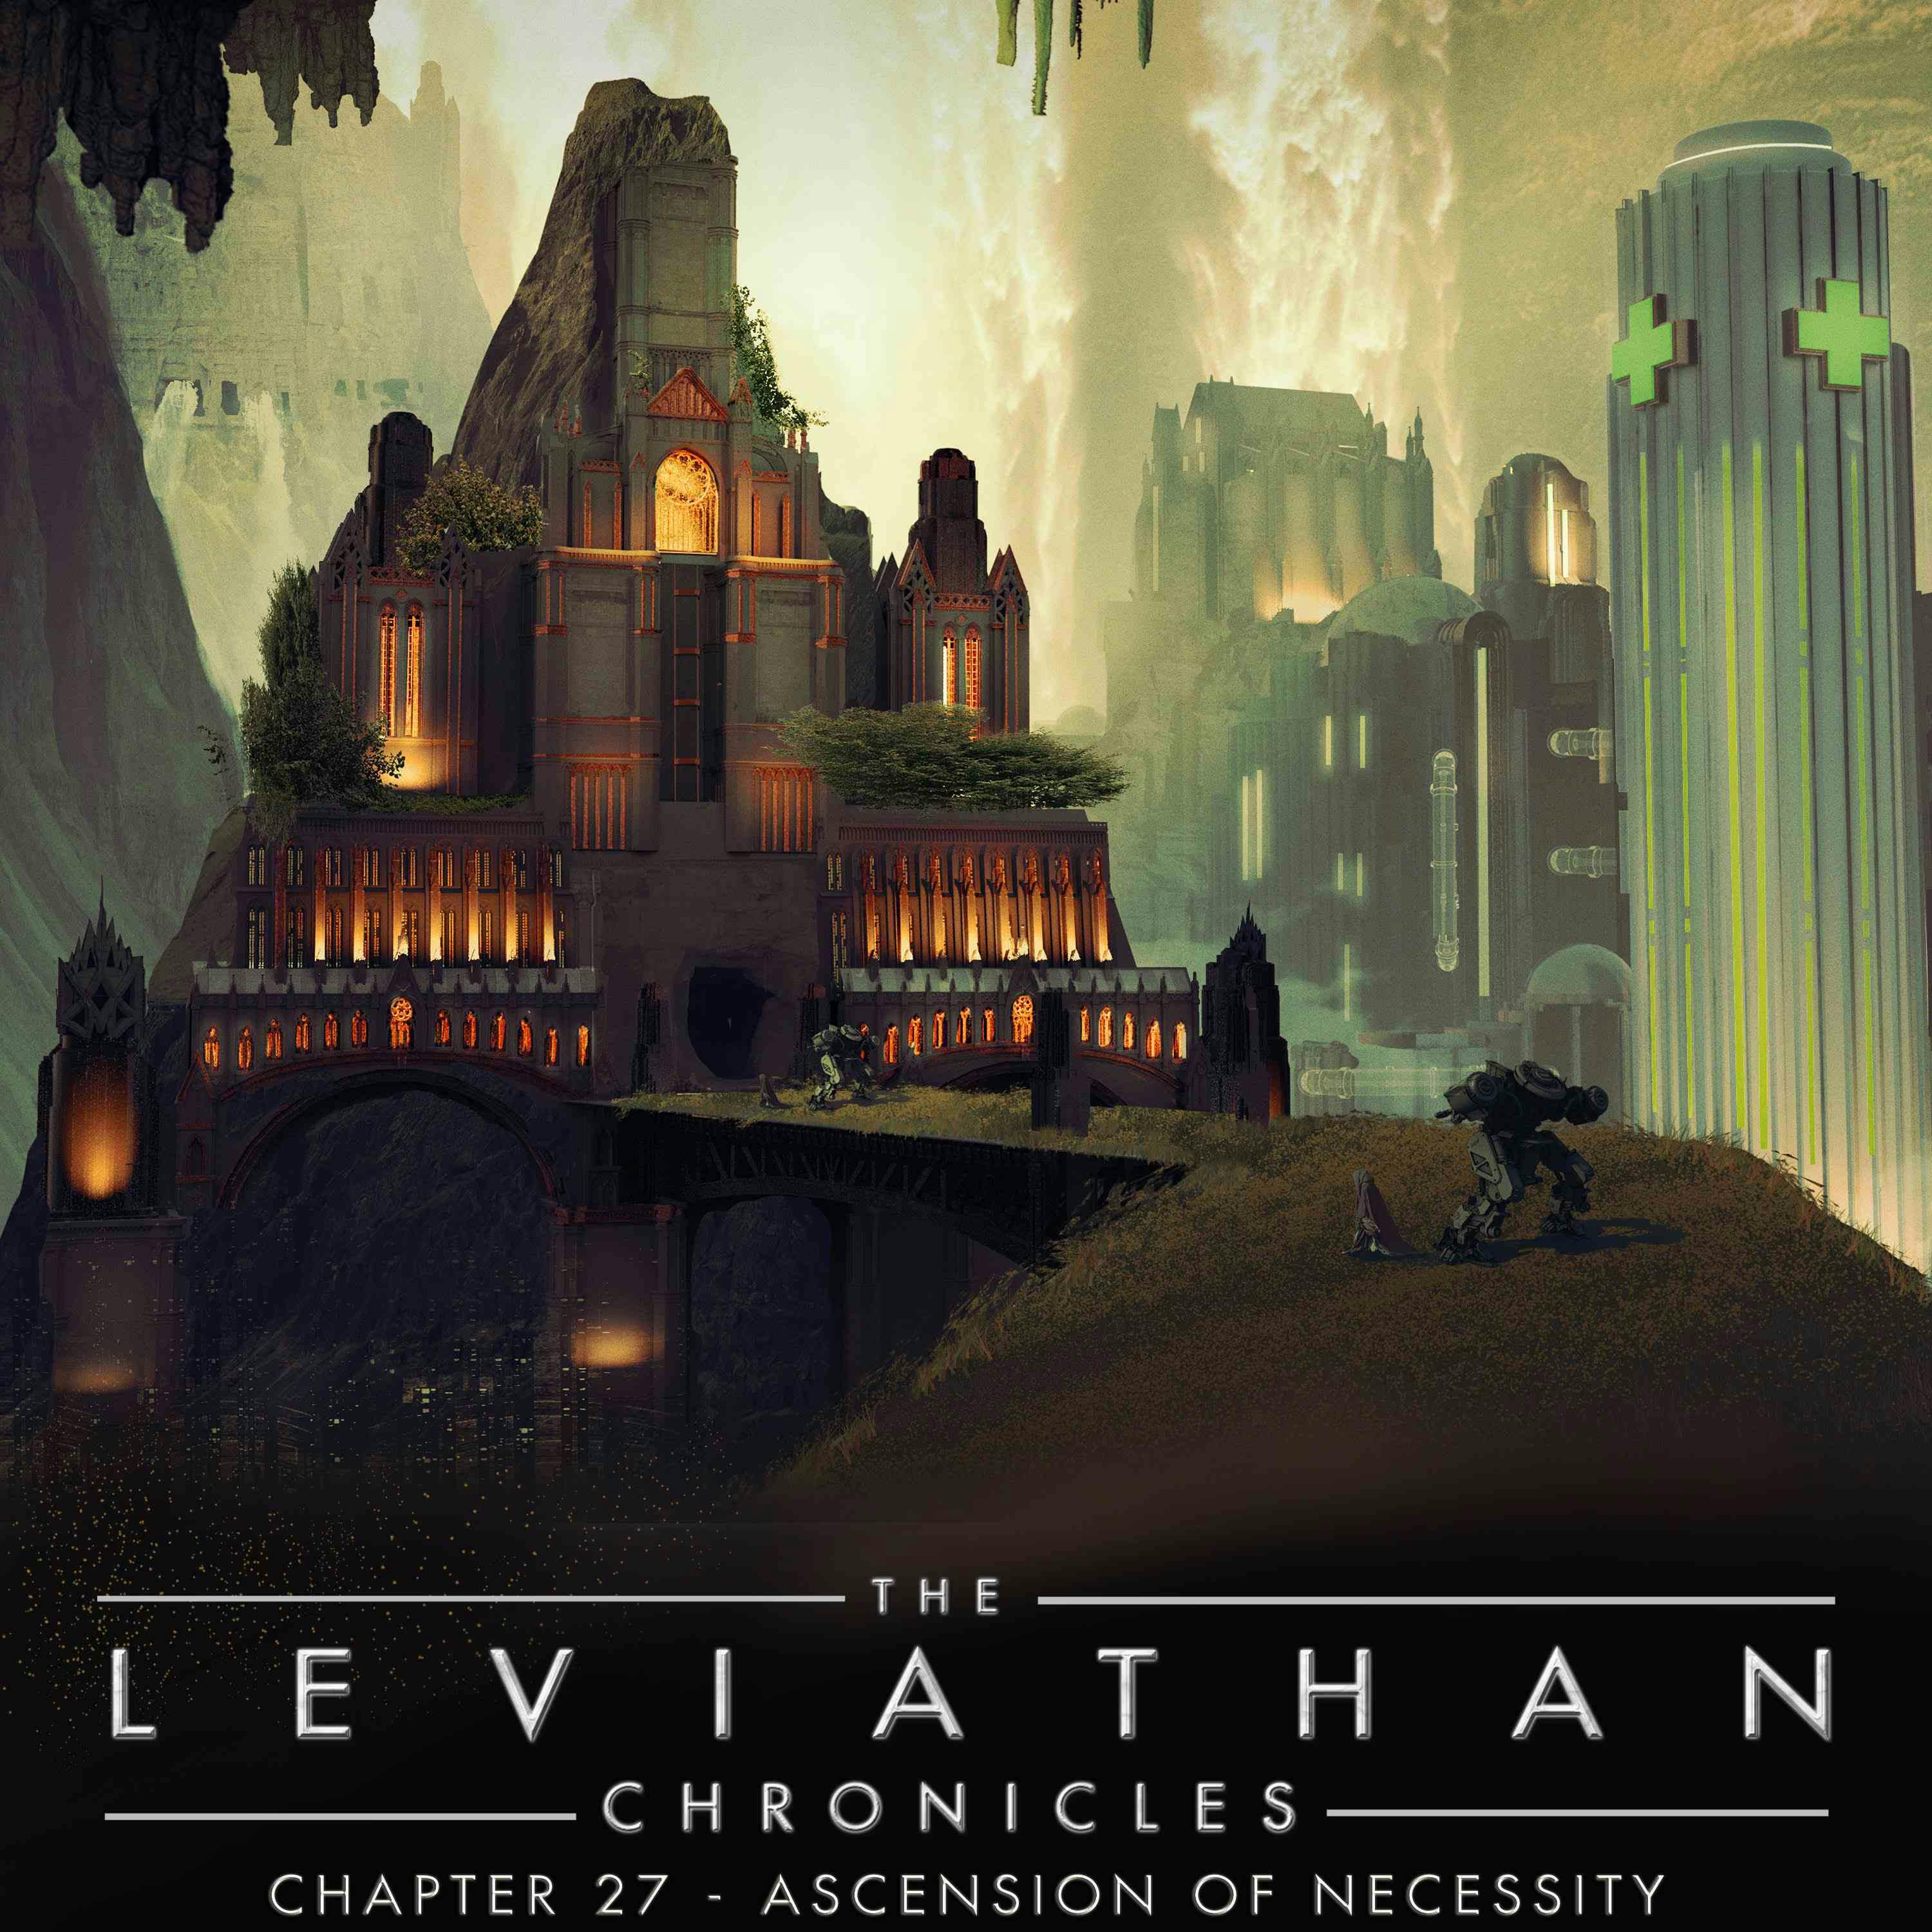 The Leviathan Chronicles | Chapter 27 - Ascension of Necessity